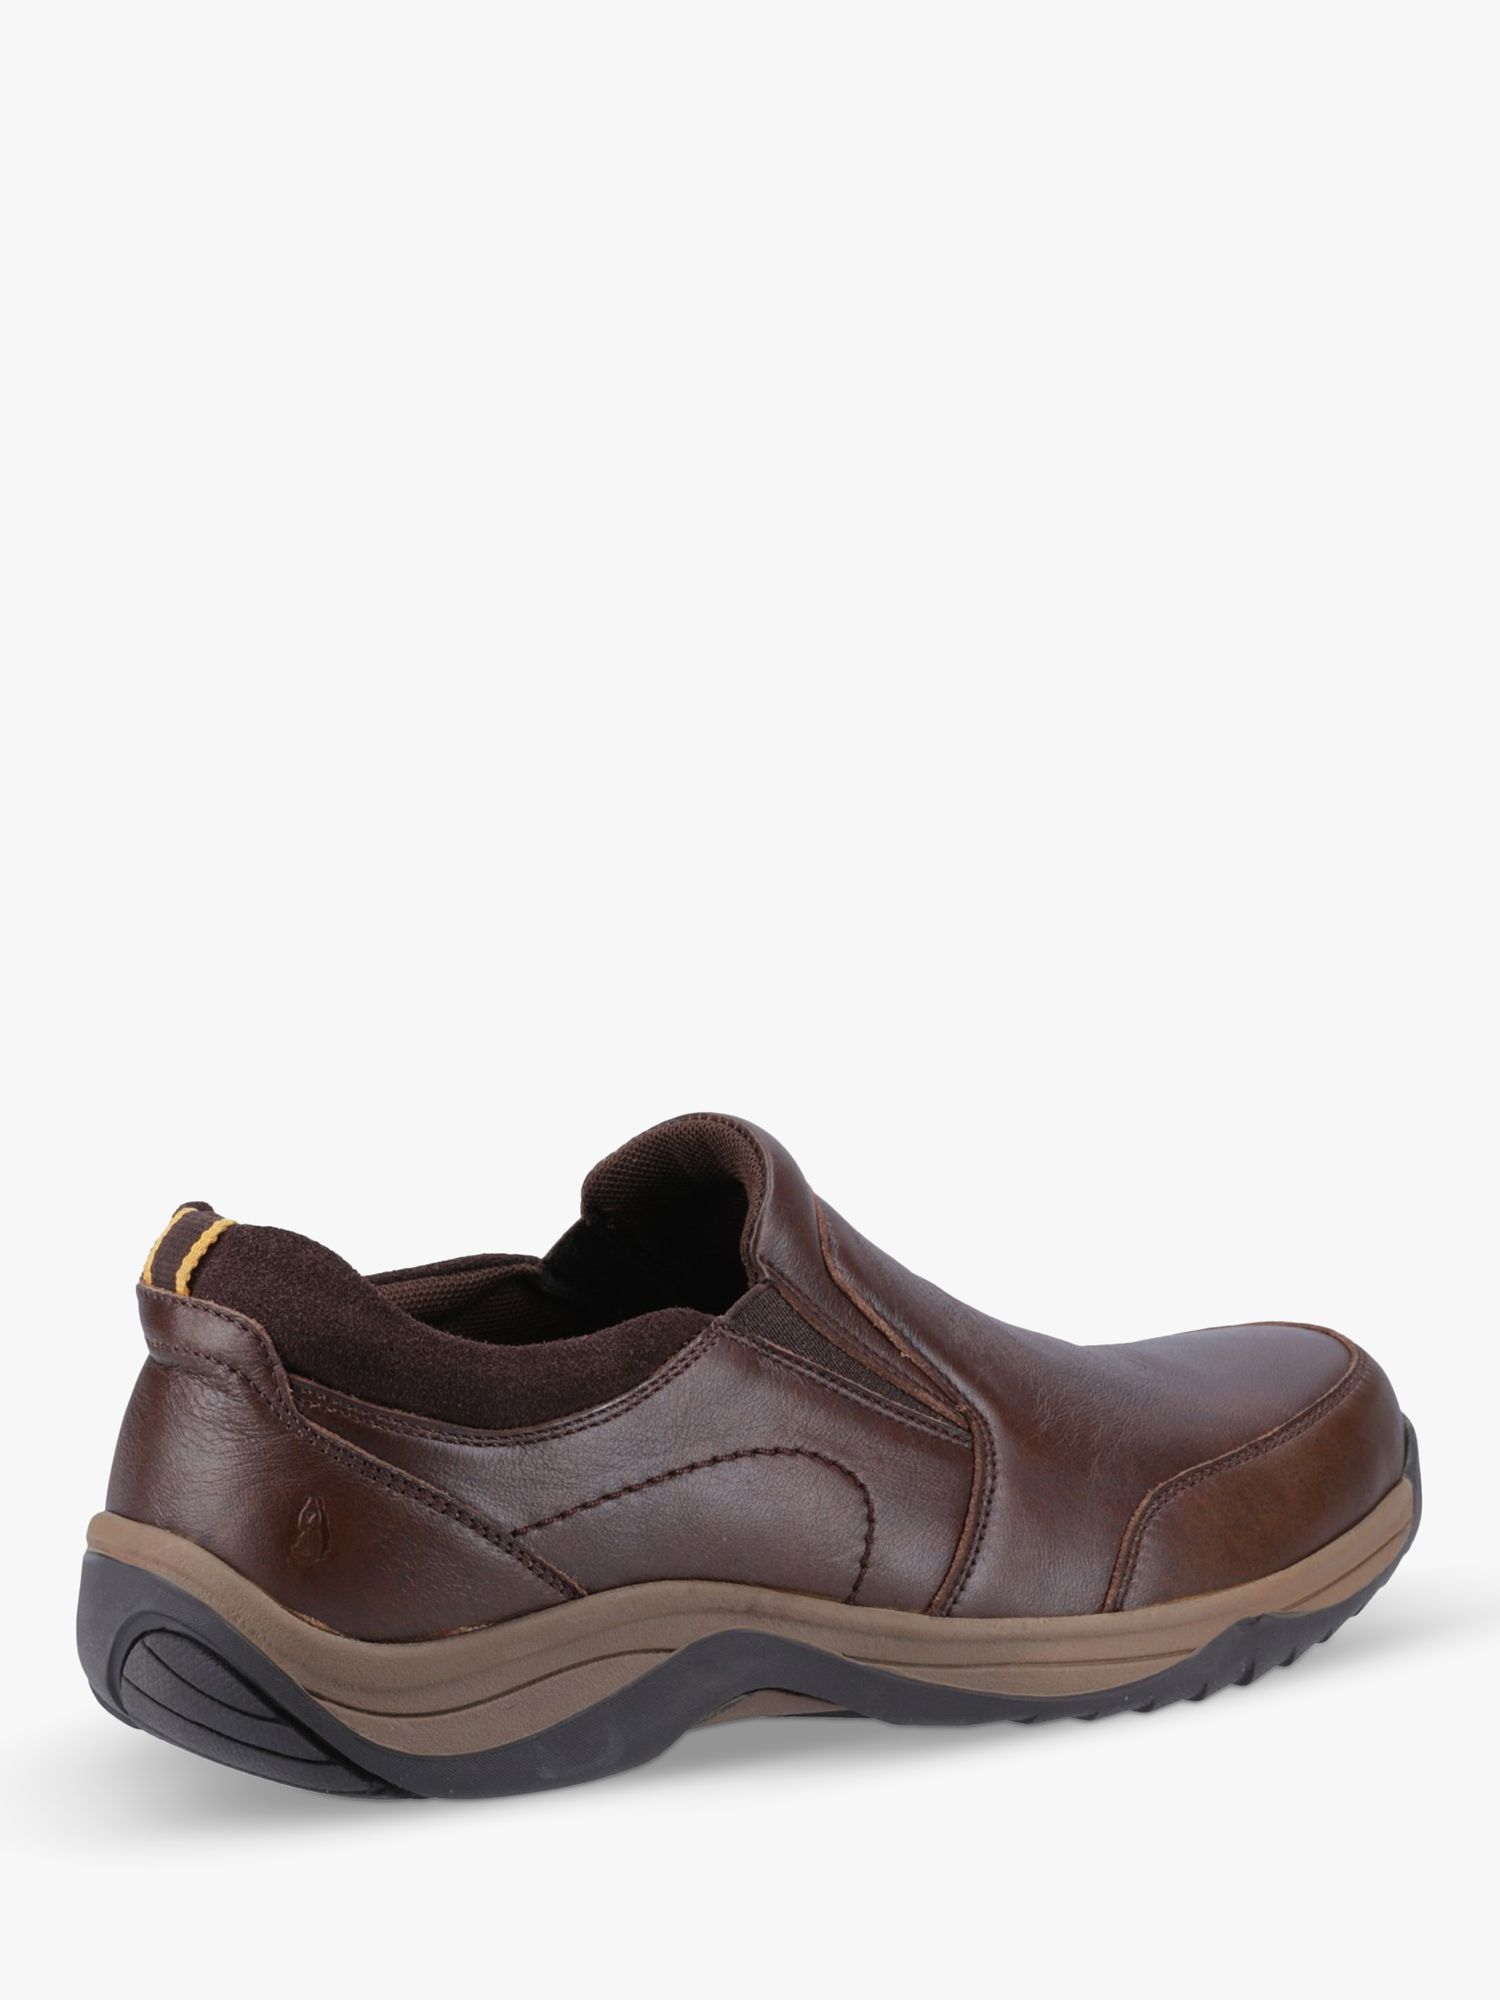 Hush Puppies Donald Leather Shoes, Coffee, 6